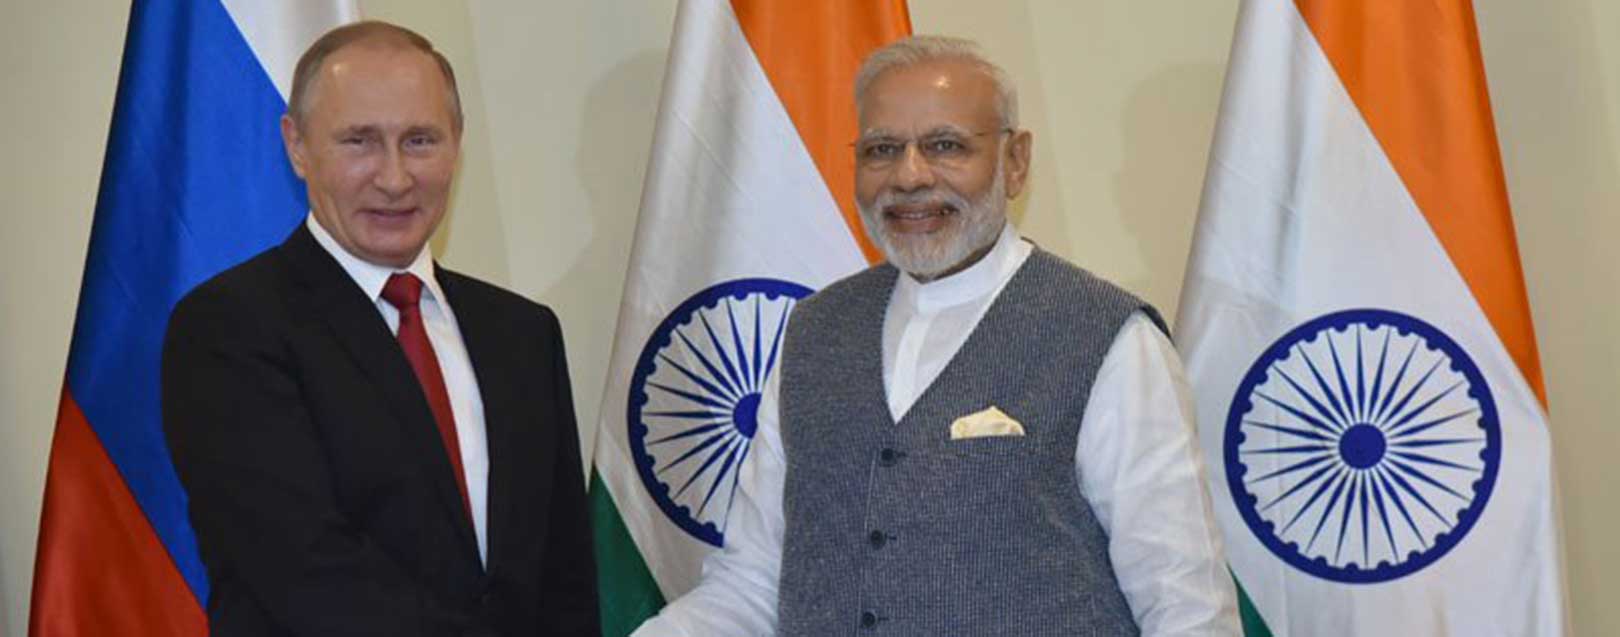 Union Cabinet informed of Indo-Russian MoU on Science & Technology